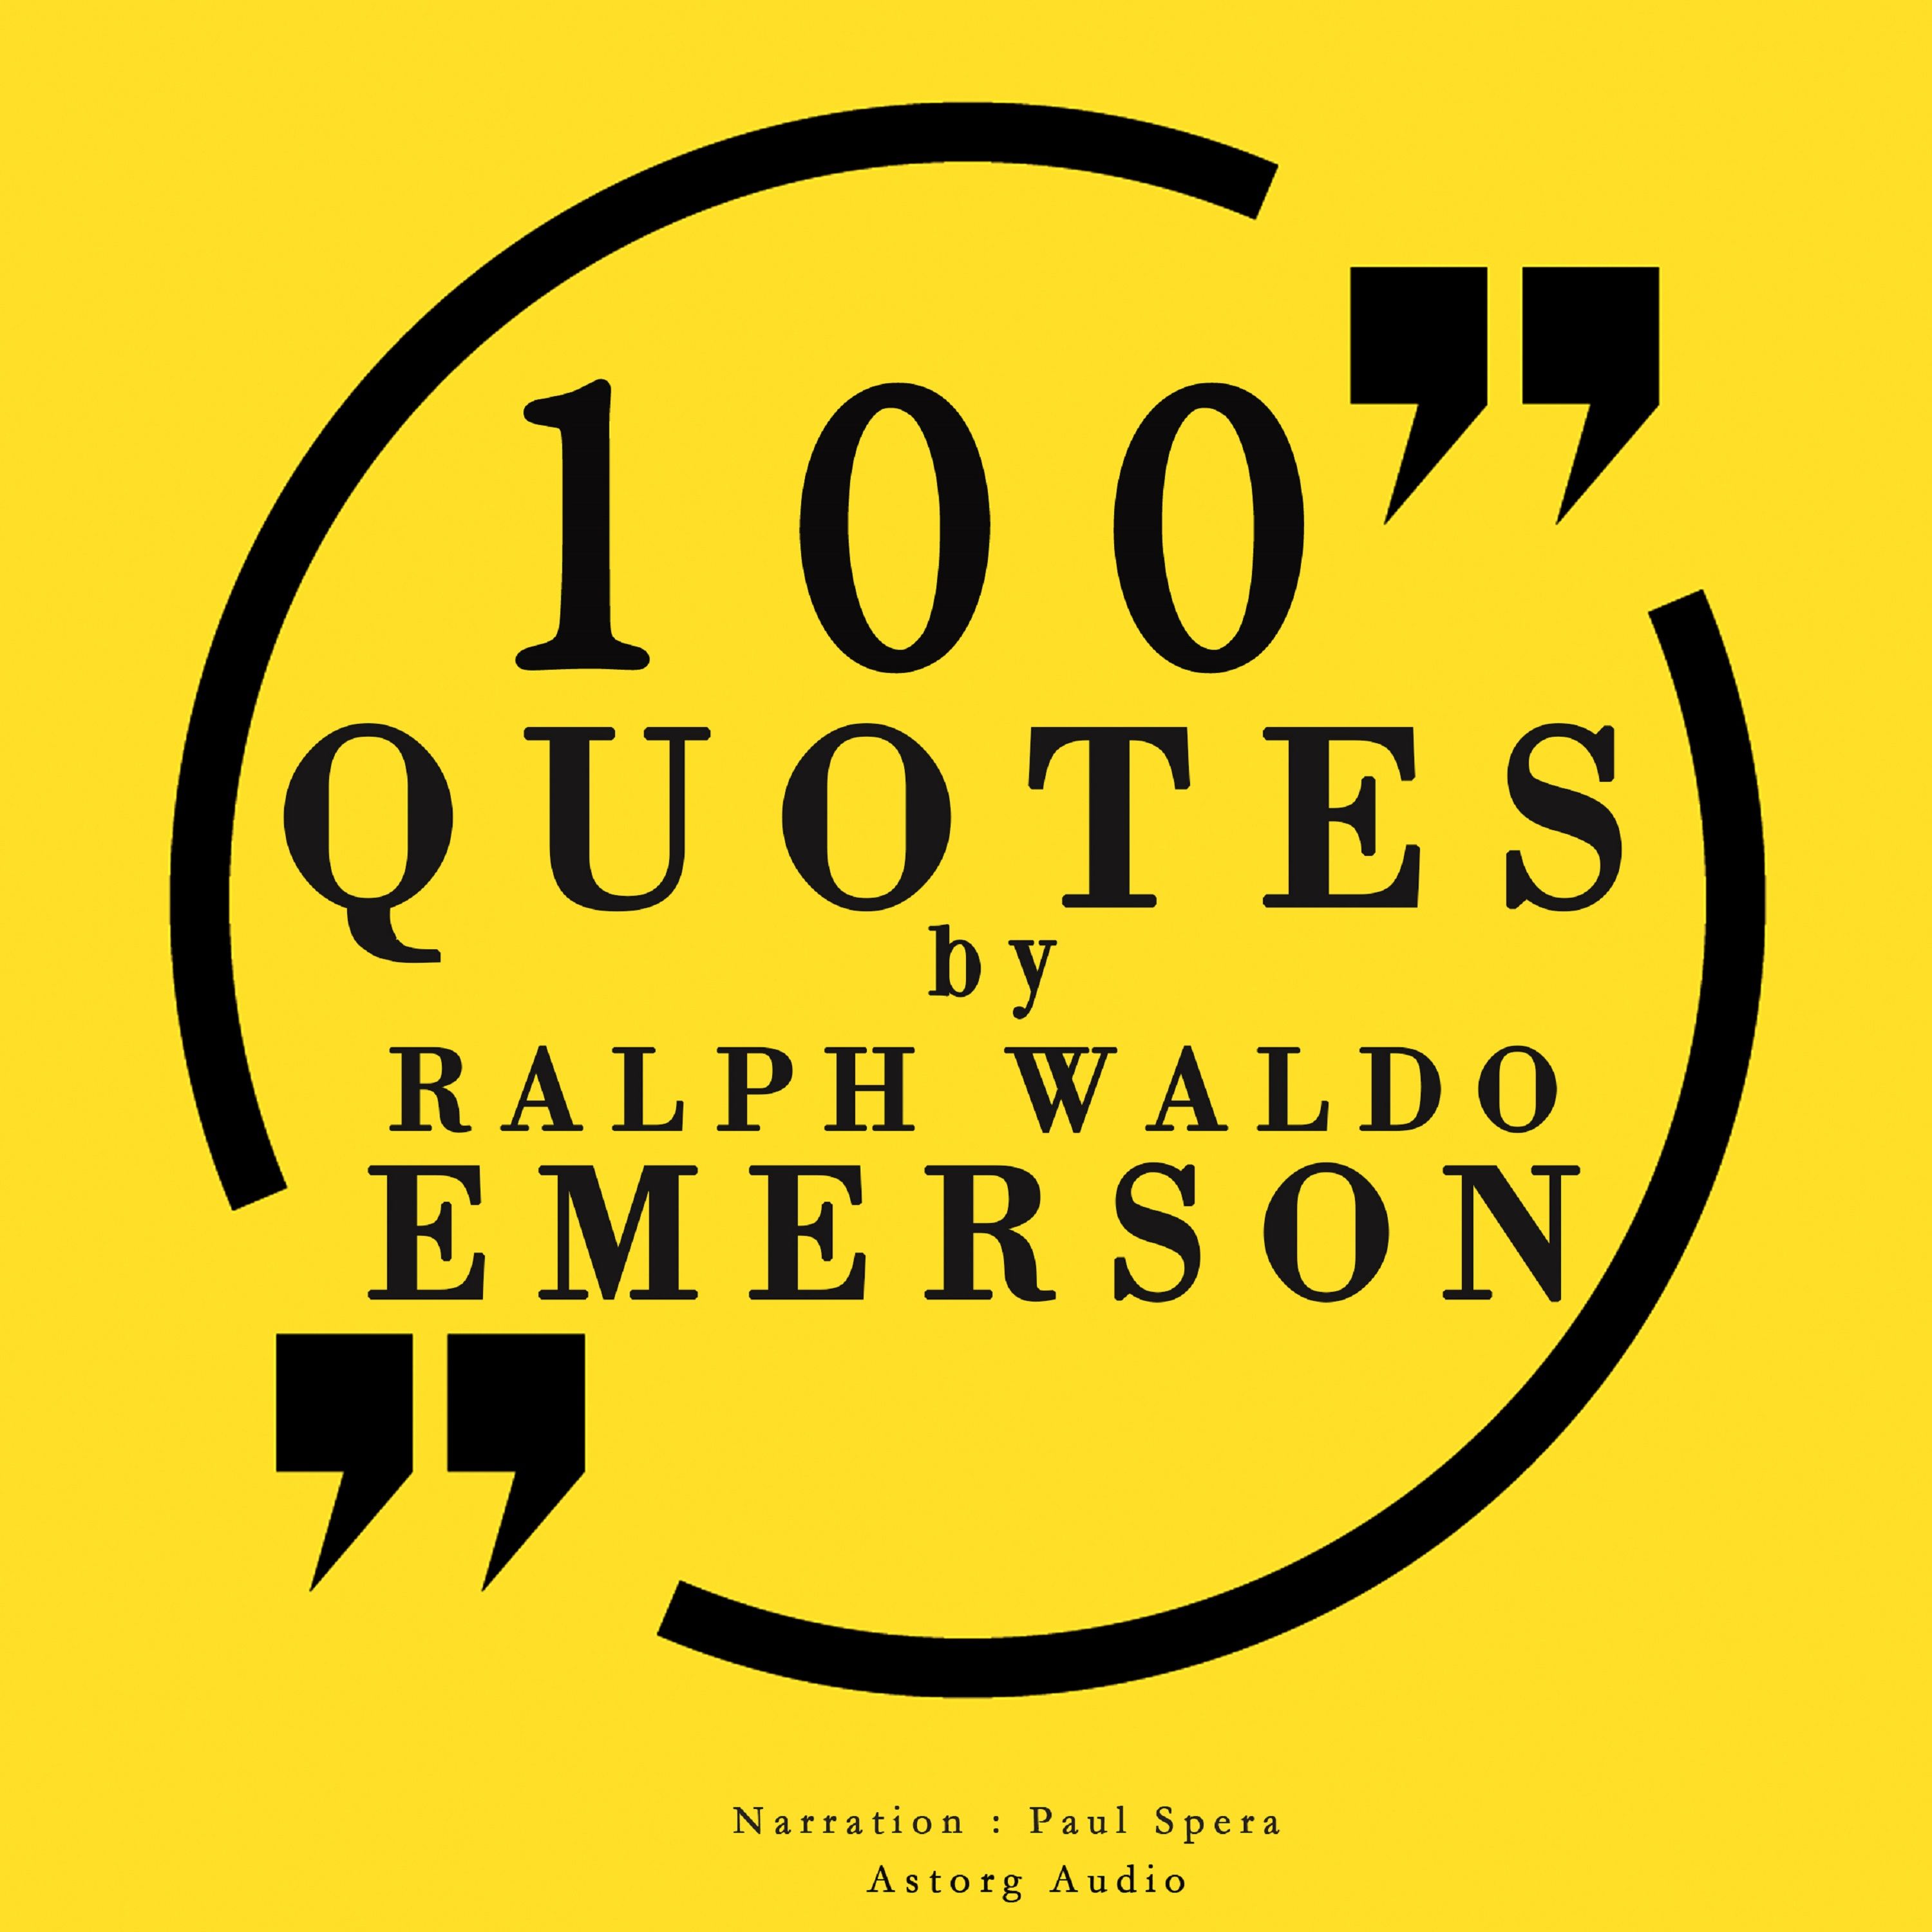 100 Quotes by Ralph Waldo Emerson, audiobook by Ralph Waldo Emerson